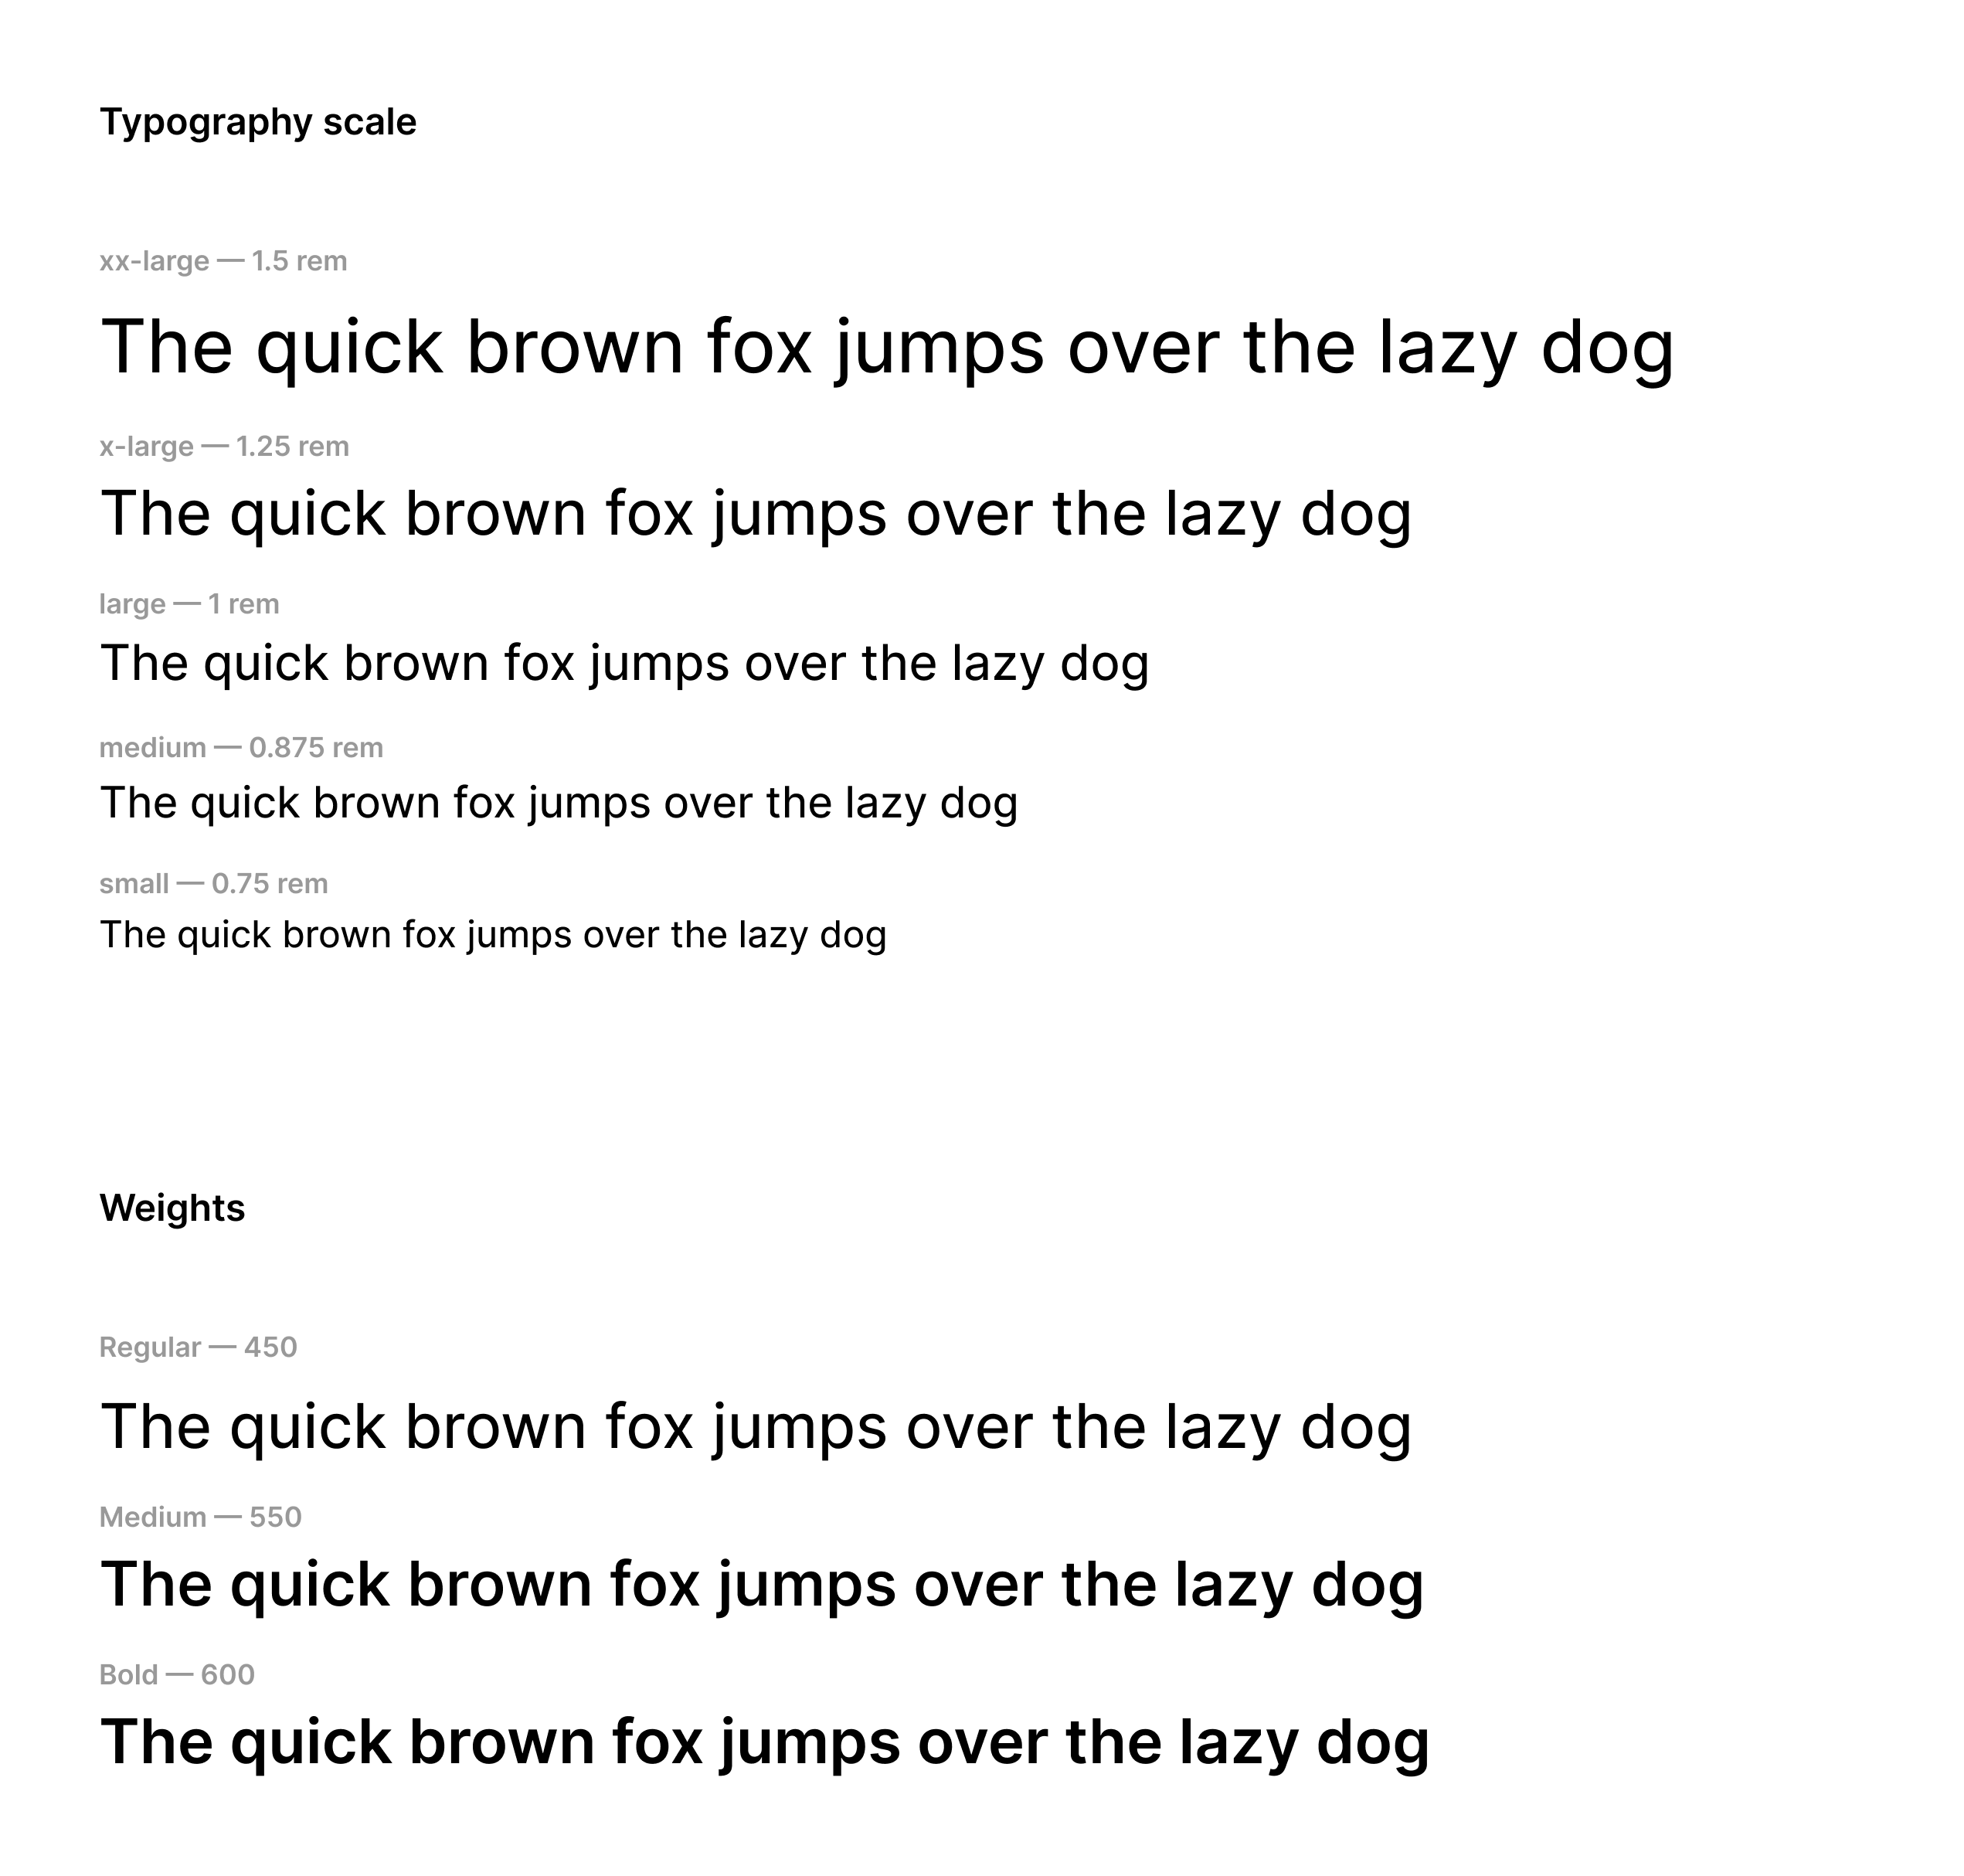 List of example texts with sizes from Watson and list of example text with font weights from Watson